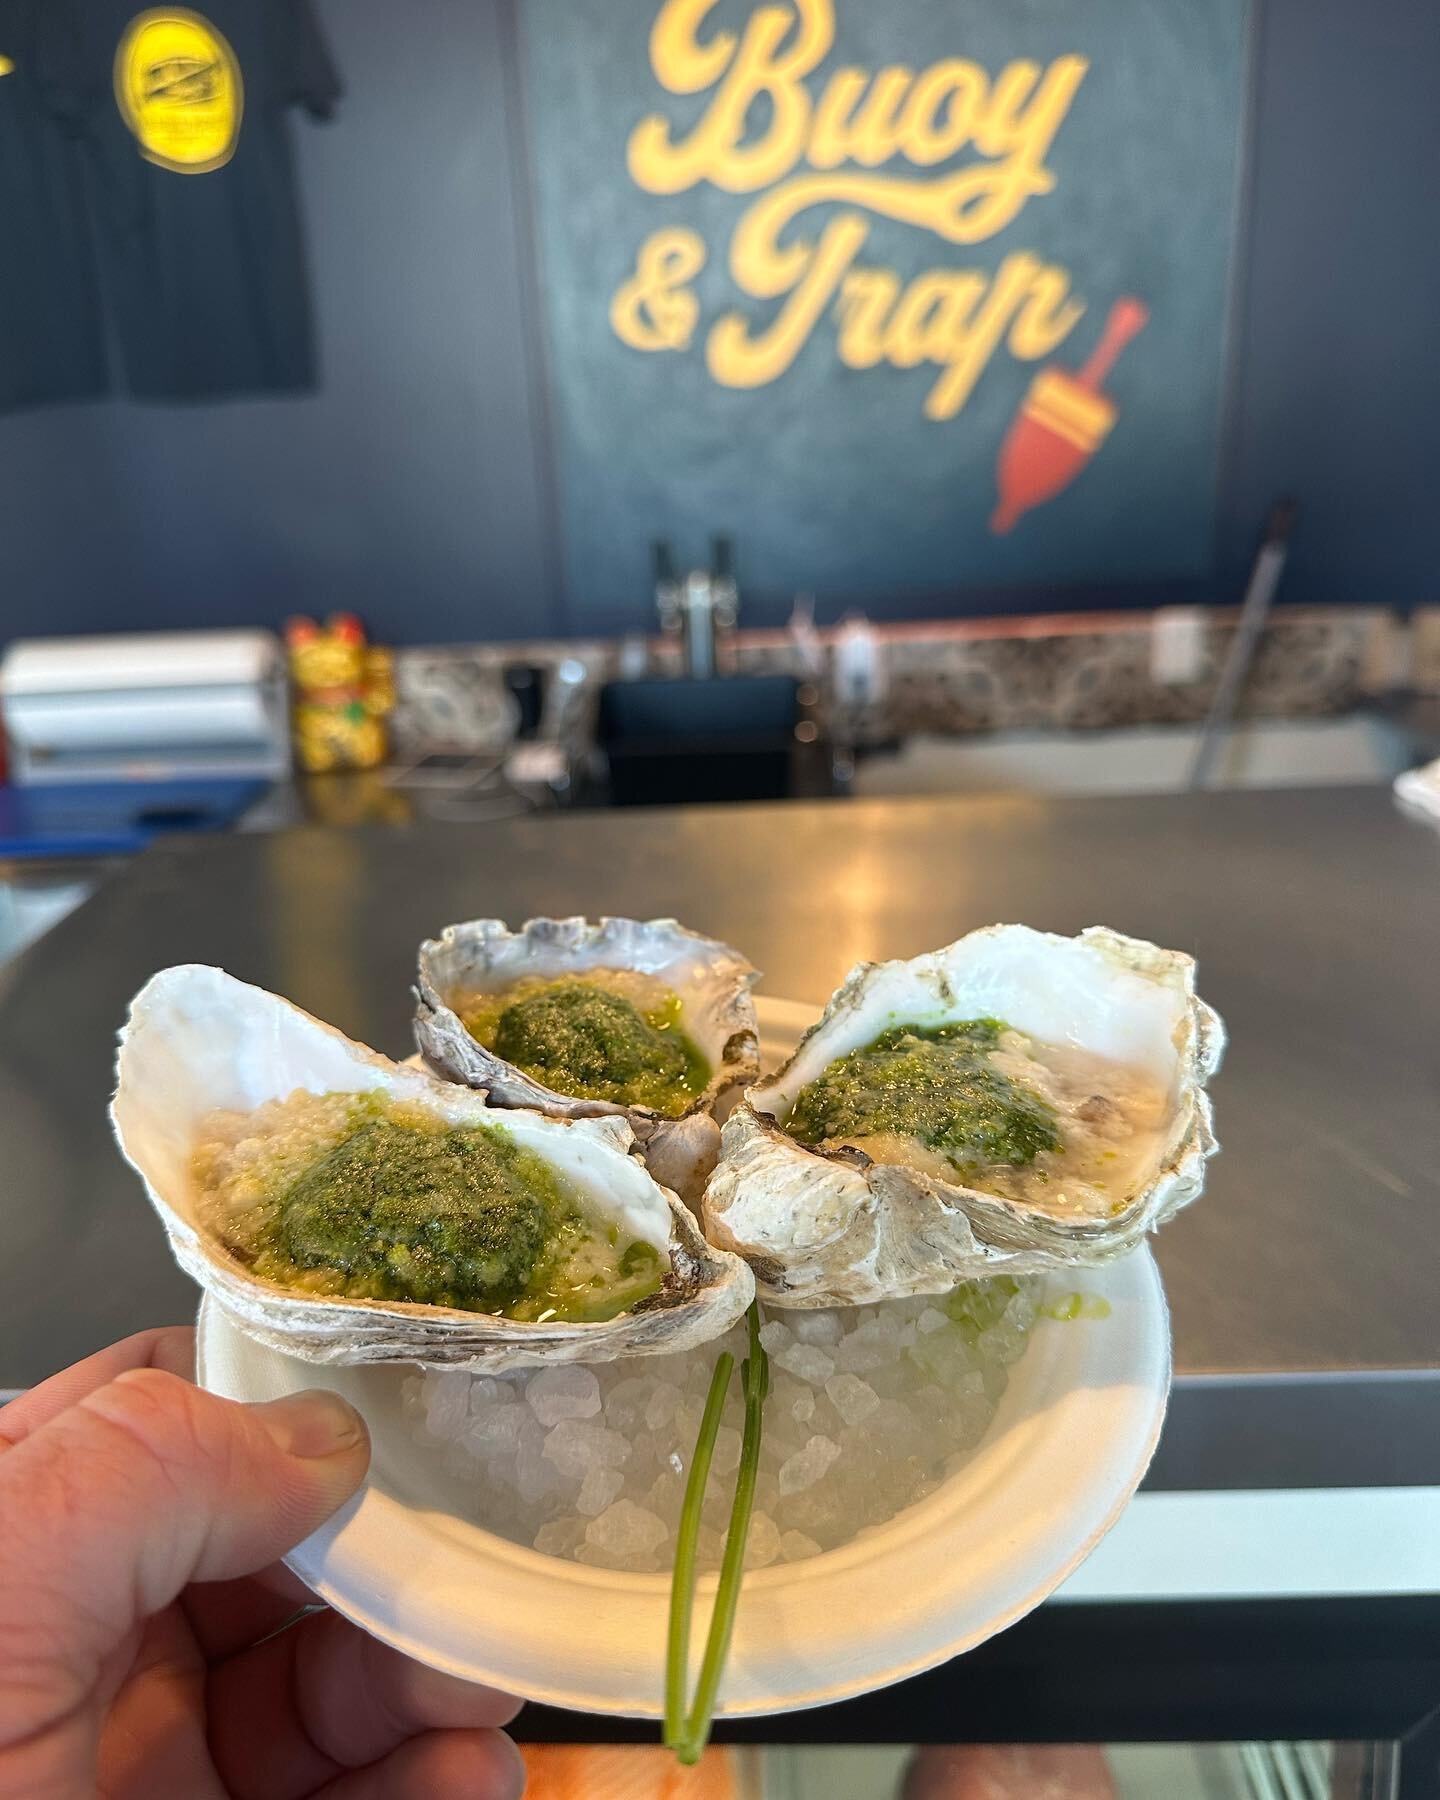 🍀🦪 Everybody&rsquo;s Irish on St. Paddy&rsquo;s Day! 🦪🍀

Join us for baked oysters with pesto compound butter, toasted Panko, and parm! We will also have our usual Fish Taco Friday program, along with a couple other little treats! 🦪🦞🦪🦞🦪🦞